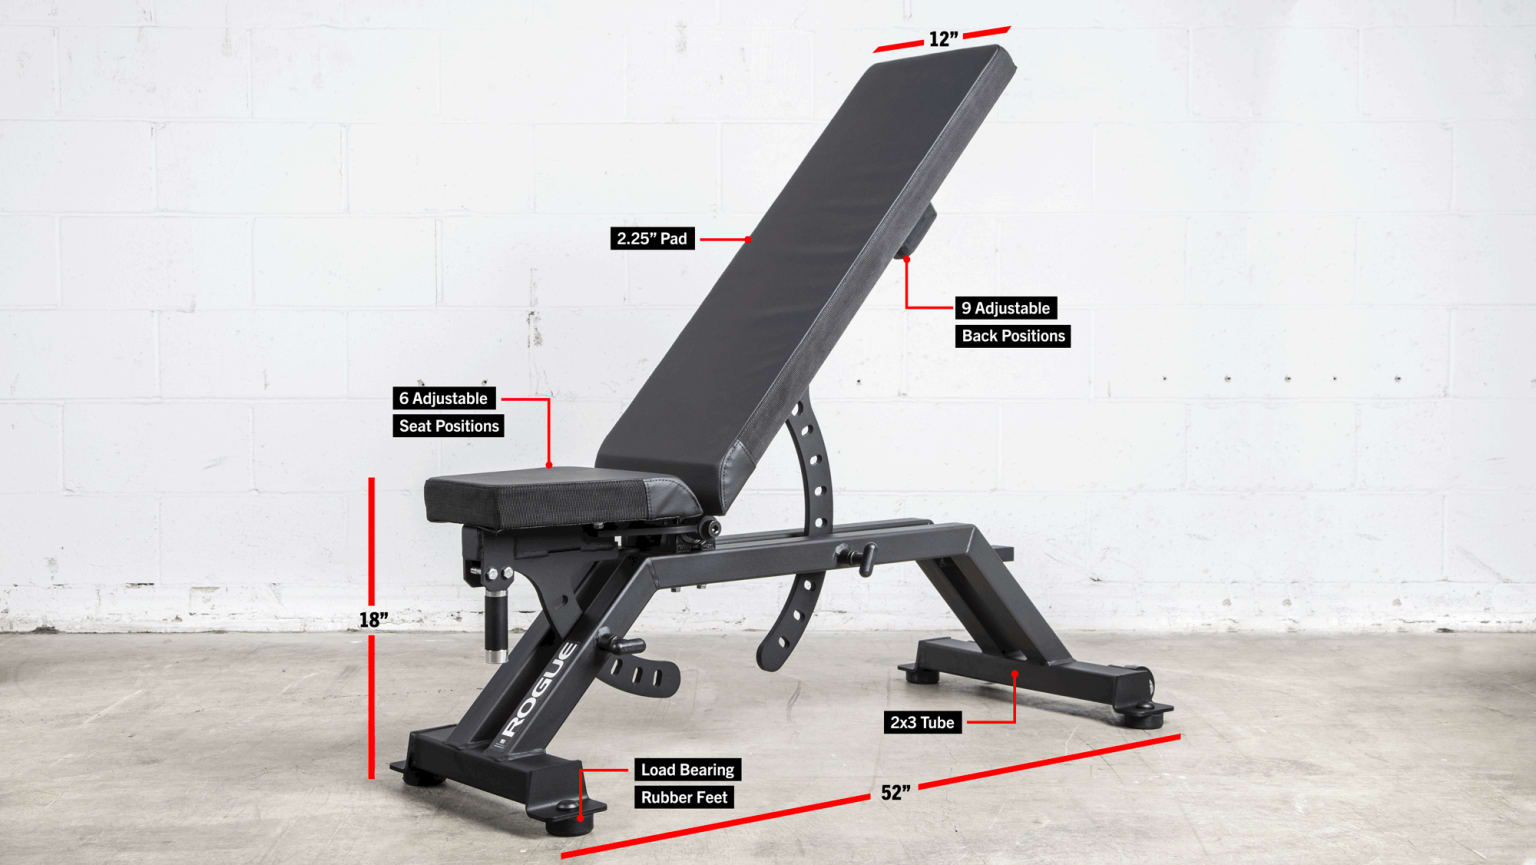 AB-2 Adjustable Bench | Rogue Fitness Canada